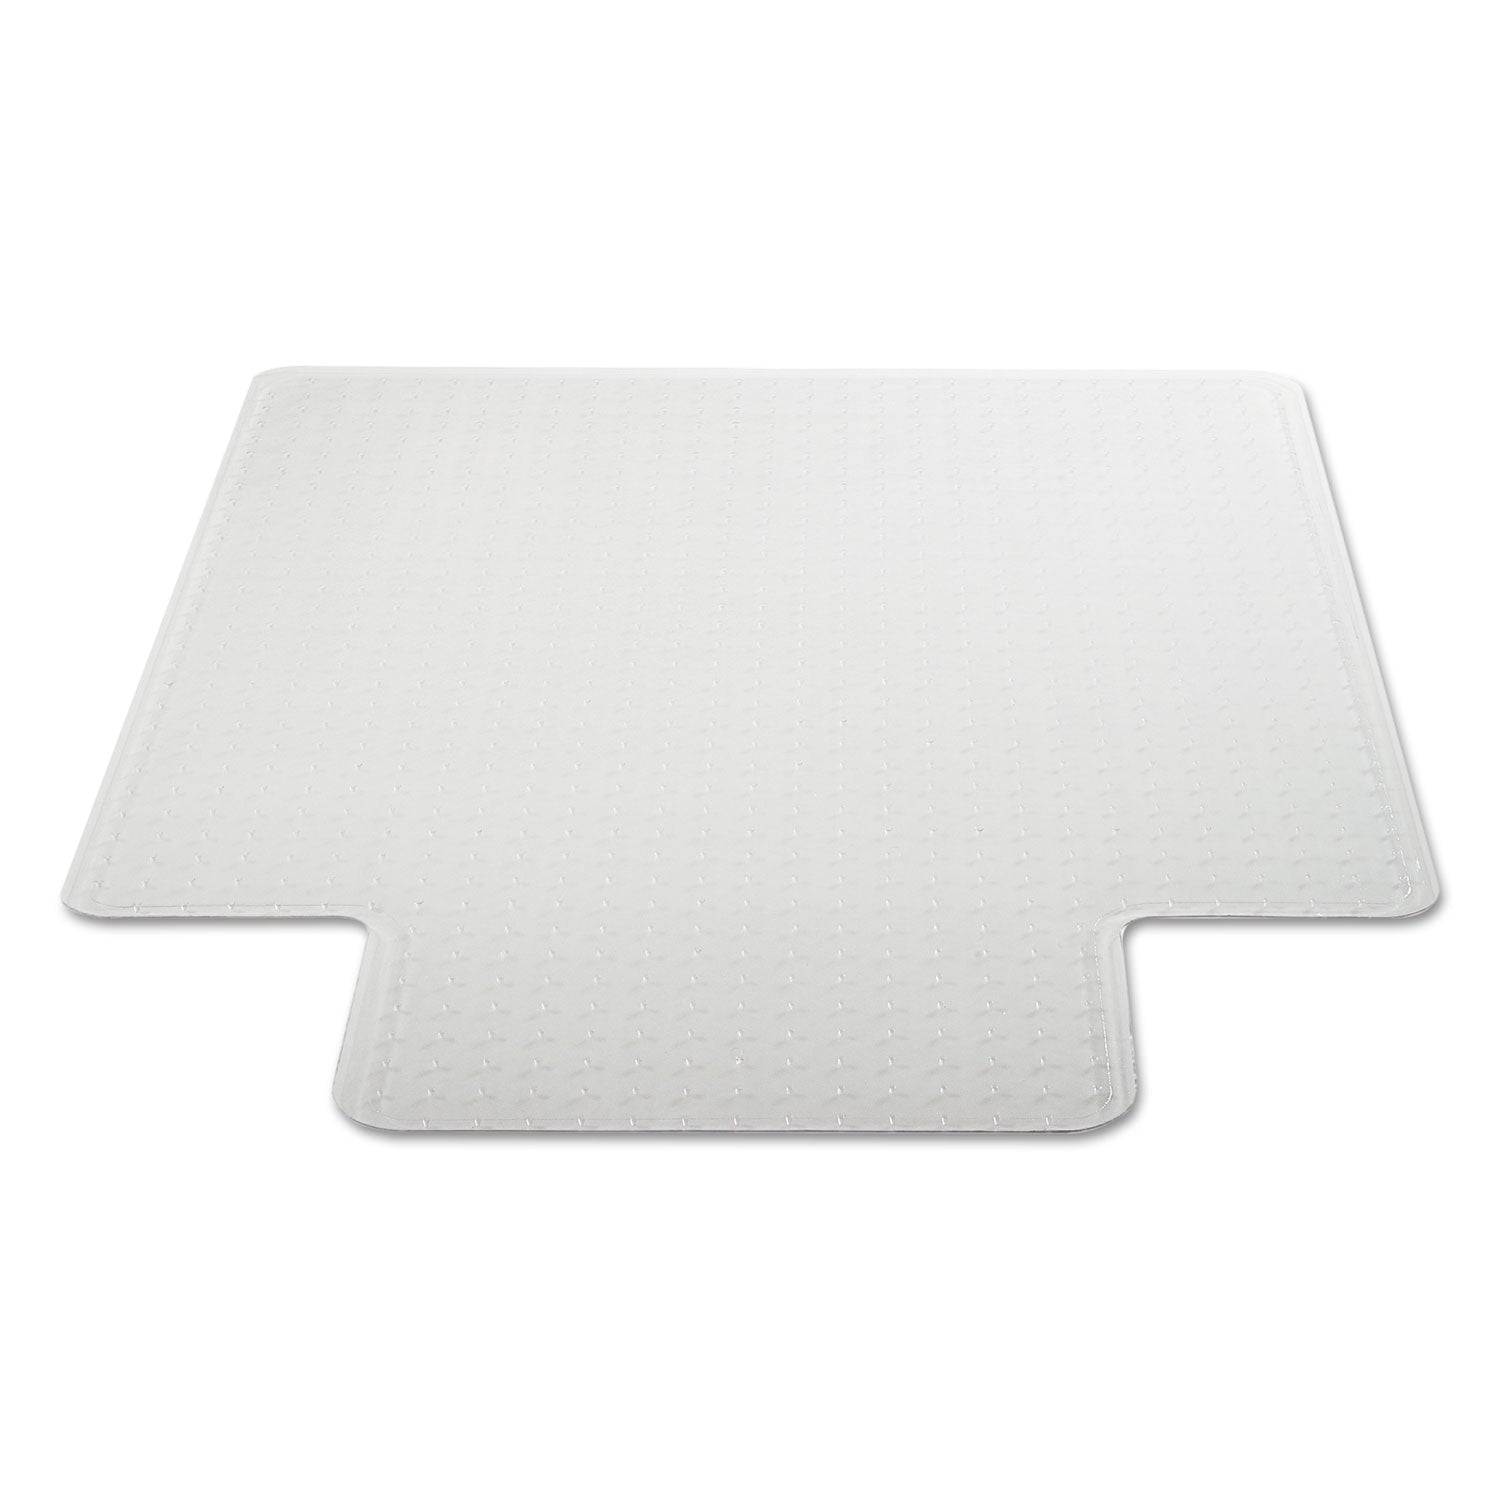 moderate-use-studded-chair-mat-for-low-pile-carpet-45-x-53-wide-lipped-clear_alemat4553clpl - 7